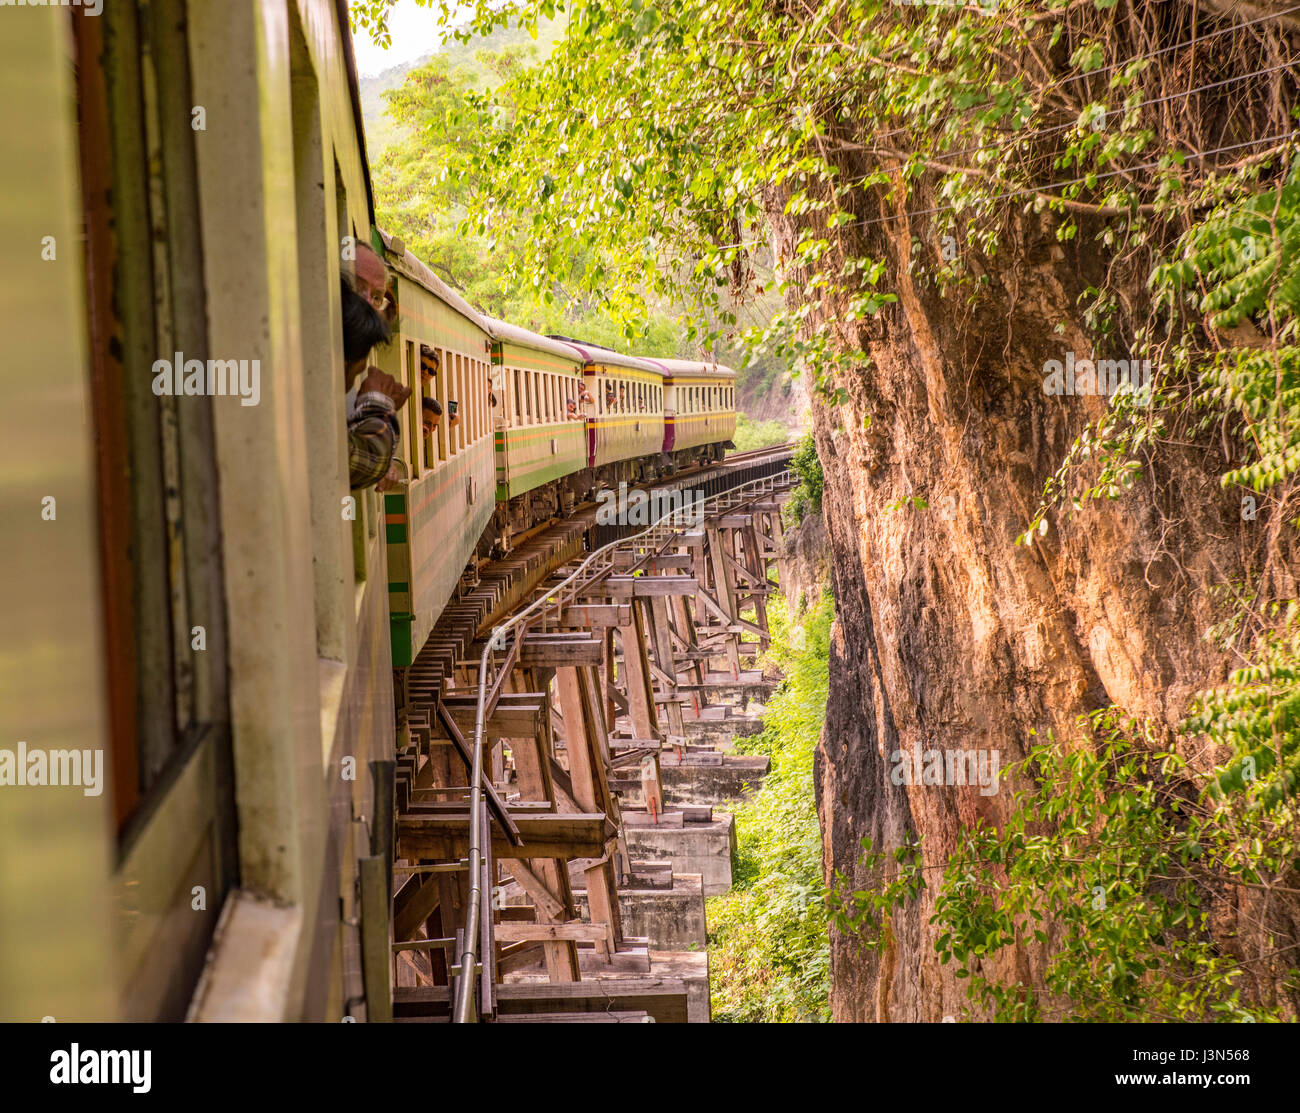 Taking a ride on the death railway Stock Photo